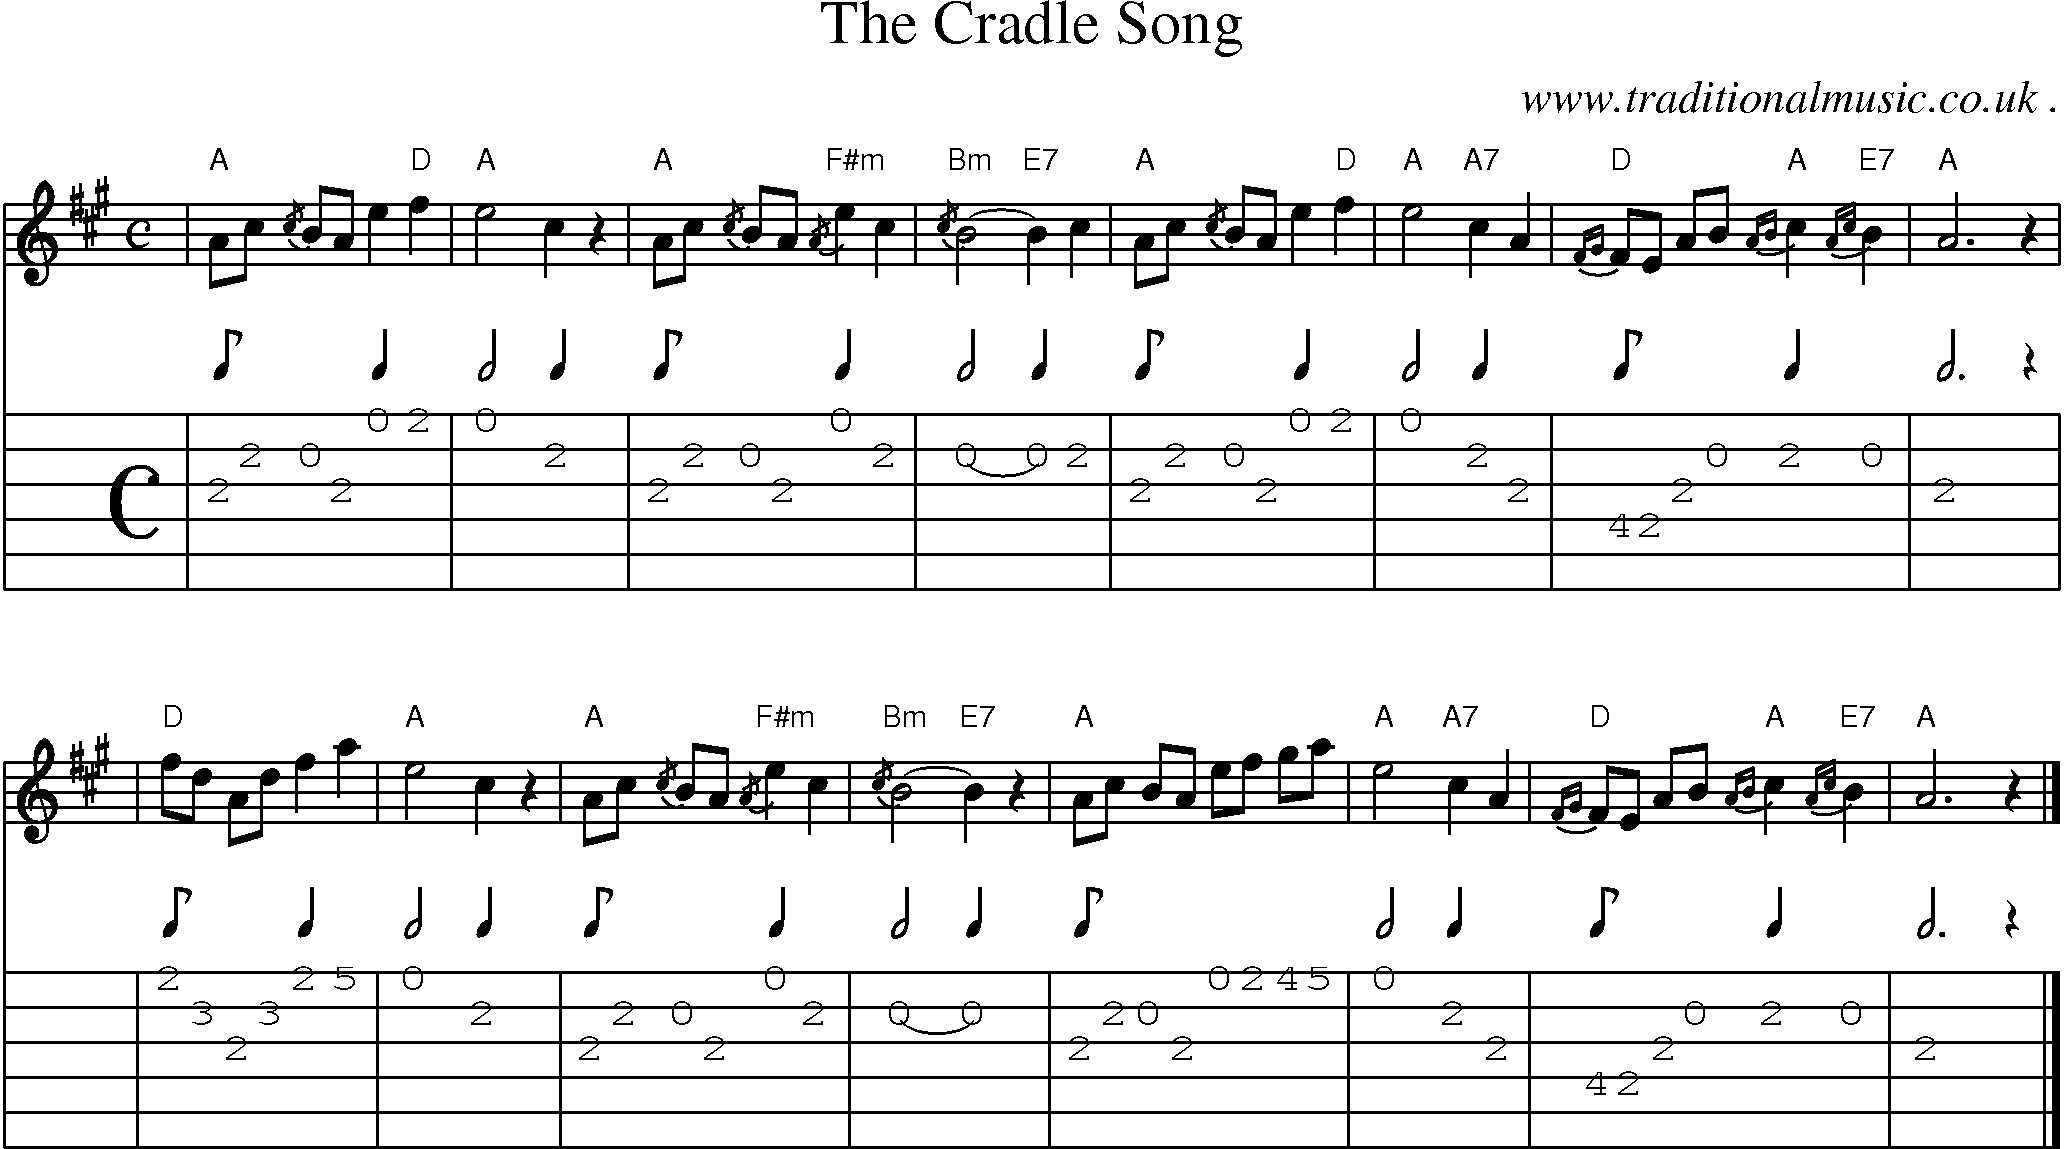 Sheet-music  score, Chords and Guitar Tabs for The Cradle Song